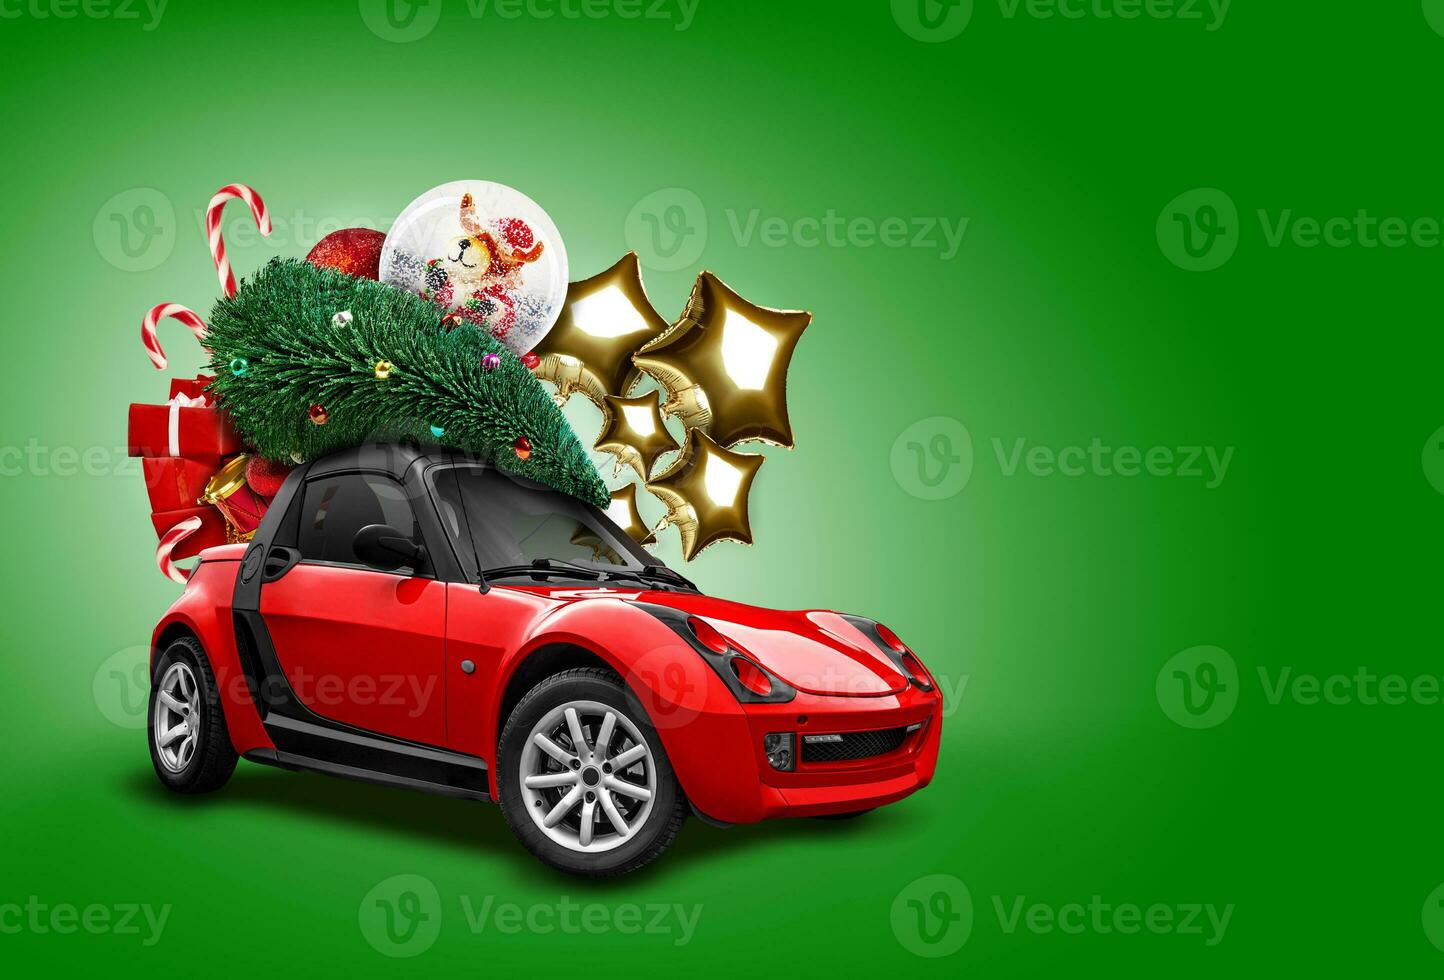 Red car on green background. Christmas tree, presents, balloons in form of golden stars, snow globe, candies on roof. Collage. Copy space, close-up. photo